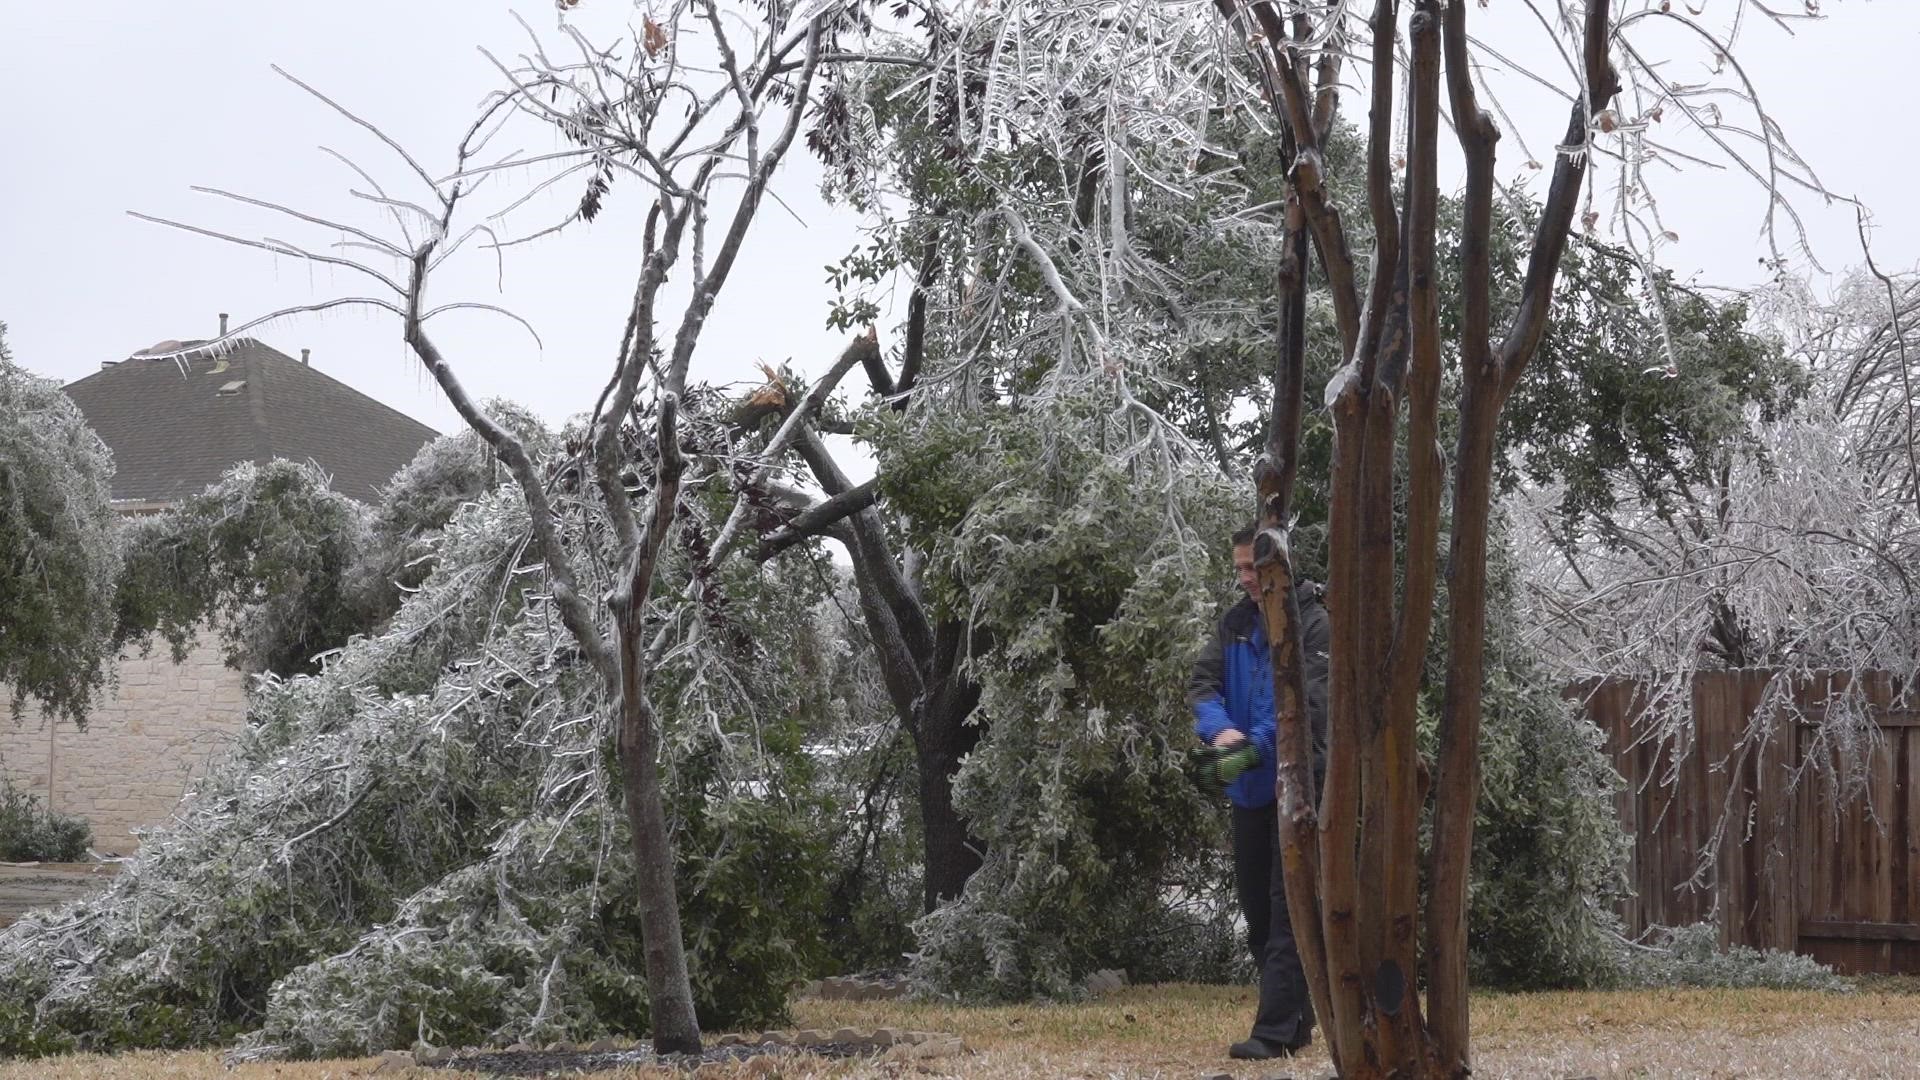 After the ice storm that Central Texas experienced, broken trees are everywhere. KVUE's Rob Evans shows how to properly cut and trim your broken trees.